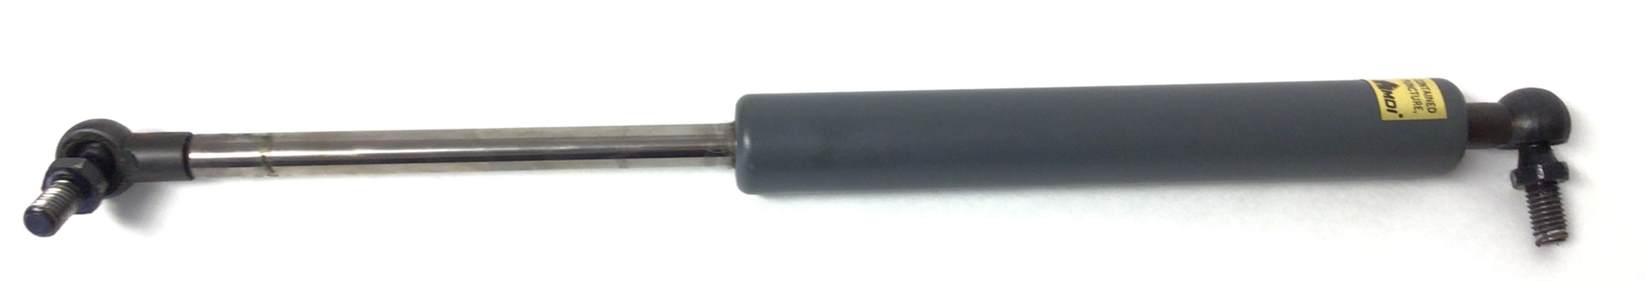 Lift Gas Shock - Used